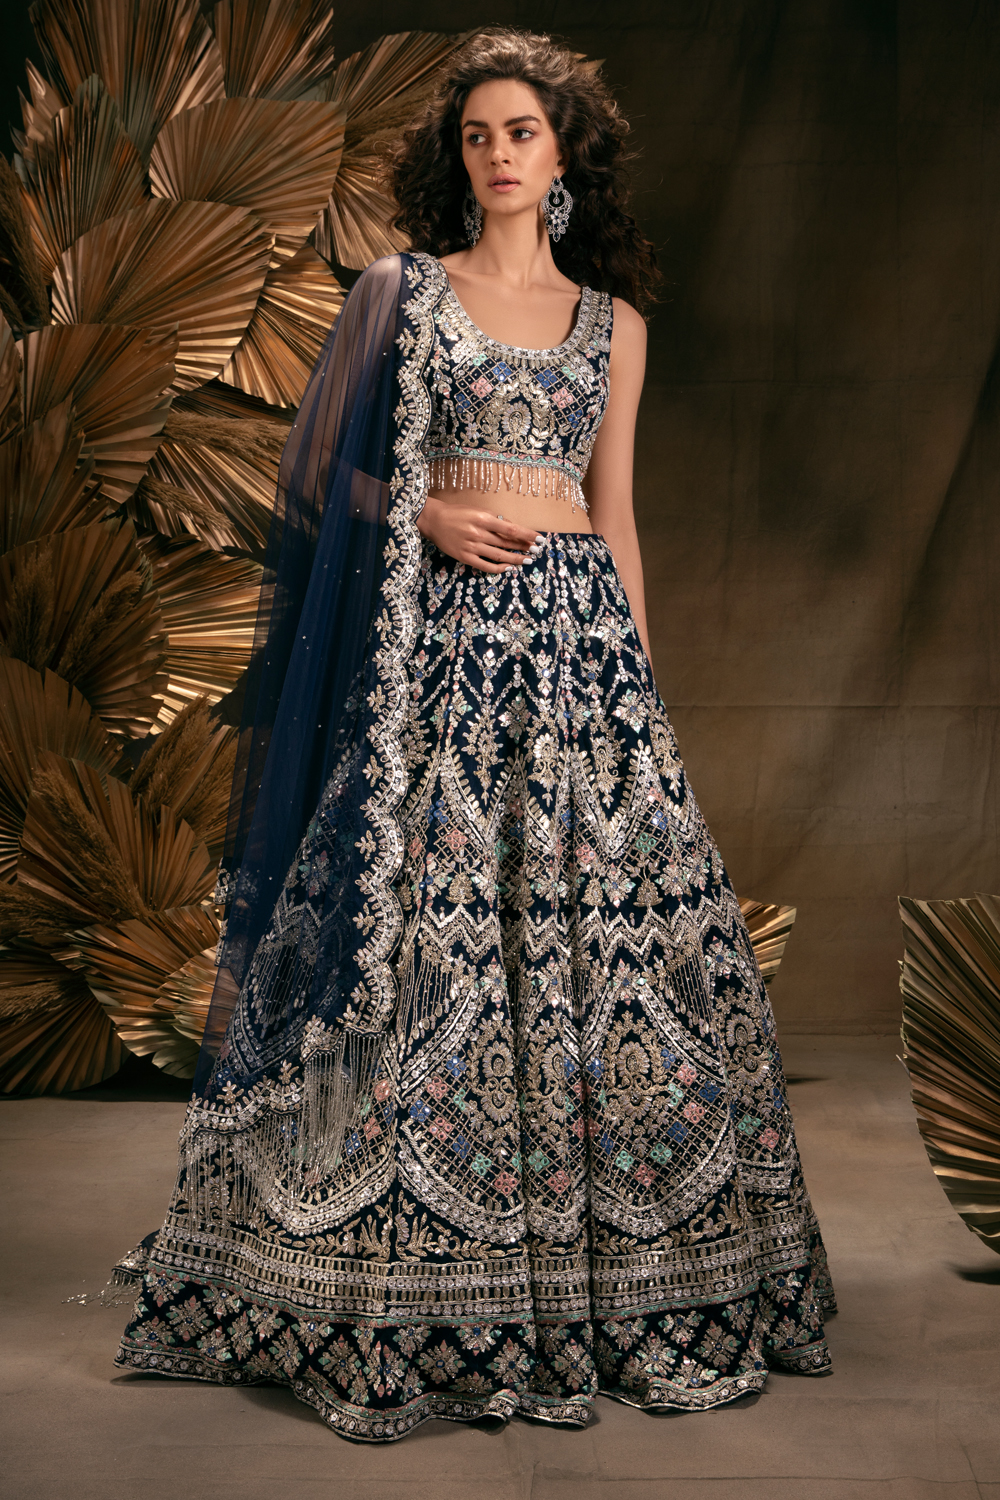 Multicolor Firozi Blue Thread & Sequins Embroidered Lehenga Choli With  Dupatta at Rs 3000 in Surat